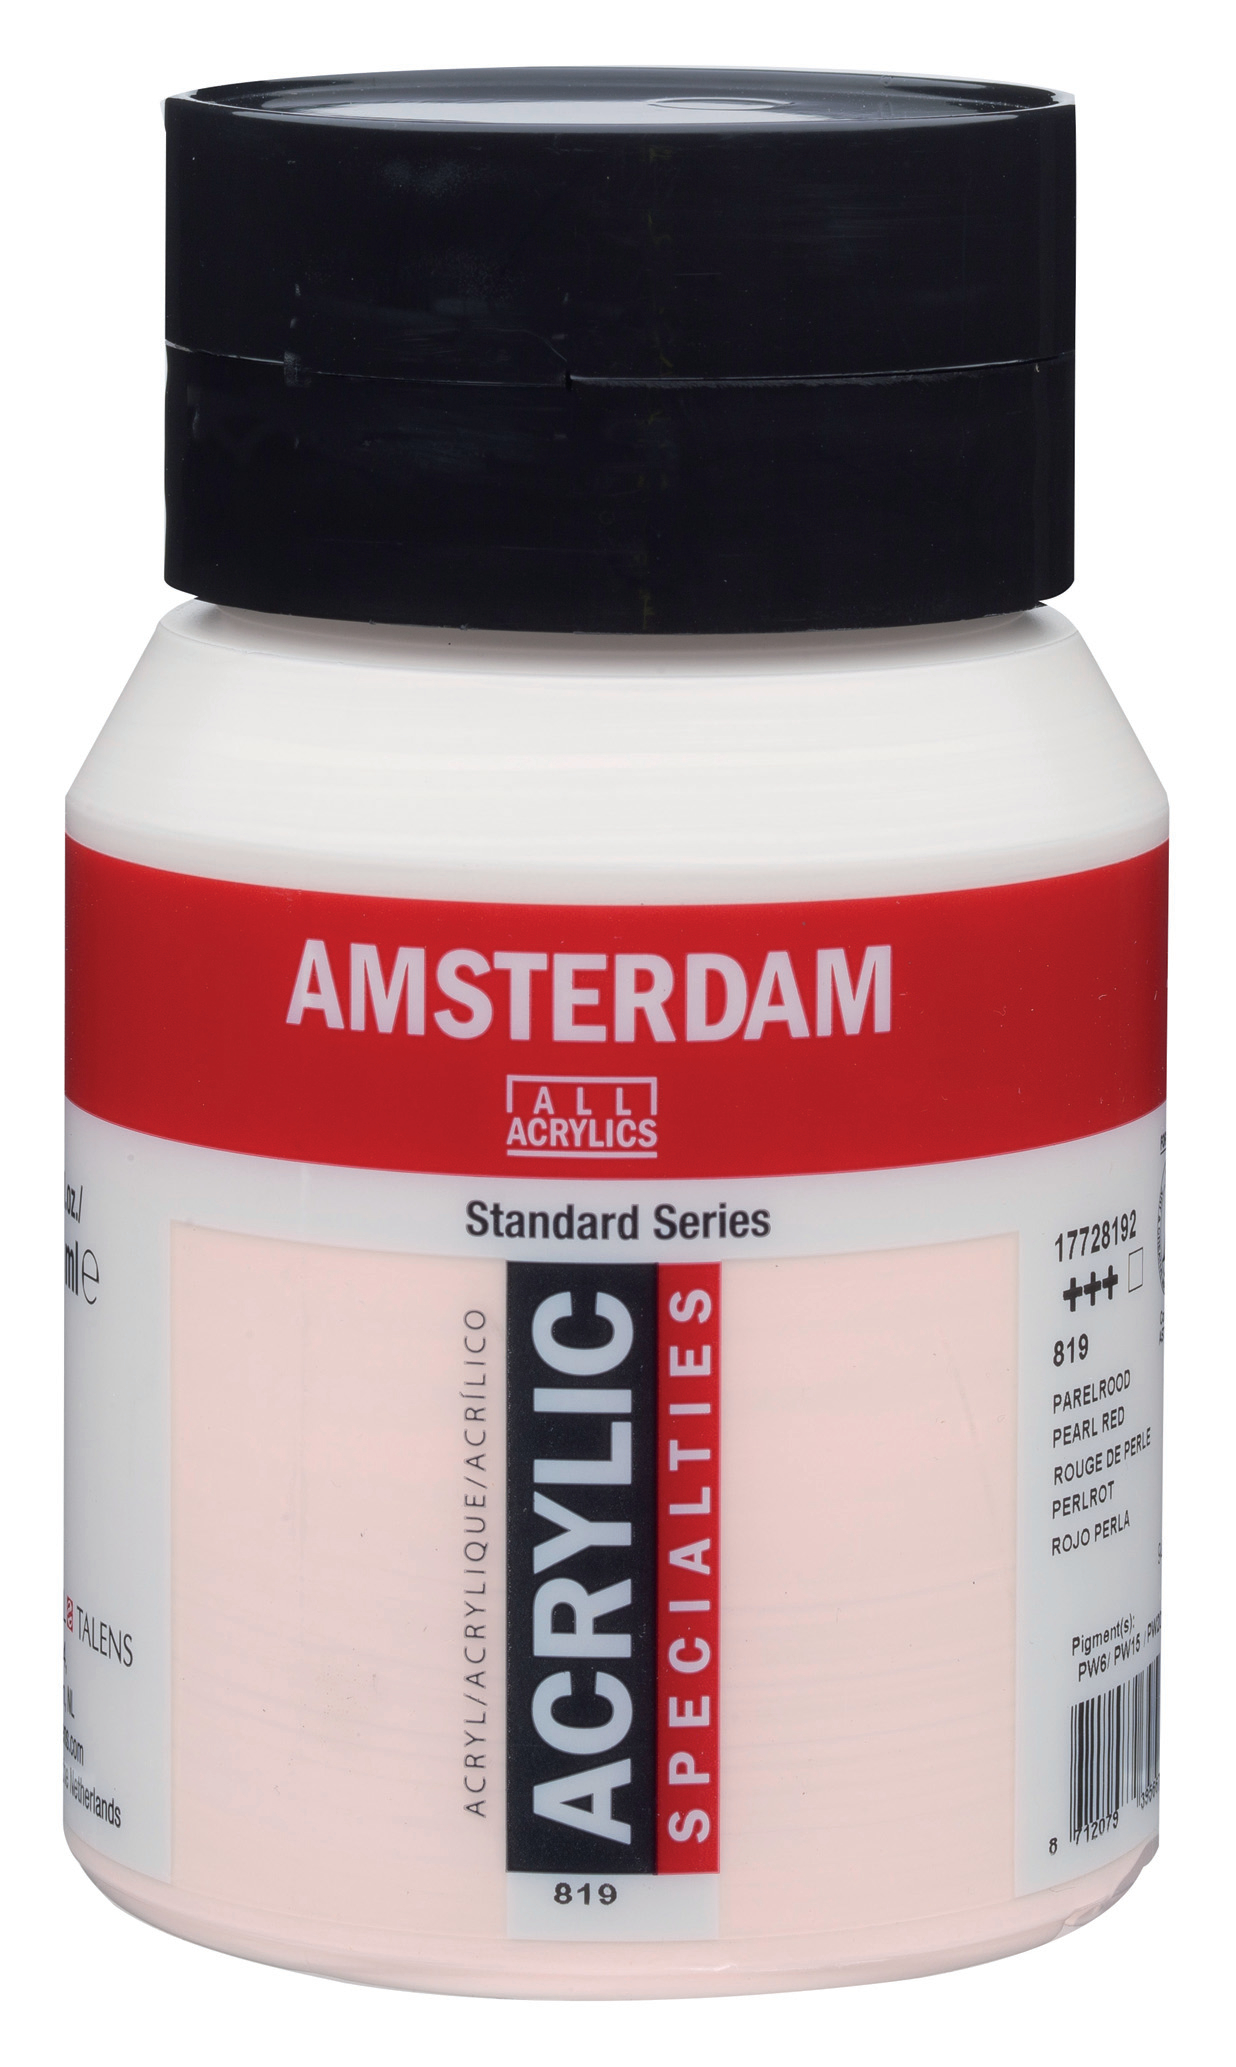 AMSTERDAM Peinture acrylique 500ml 17728192 pearl red 819 pearl red 819